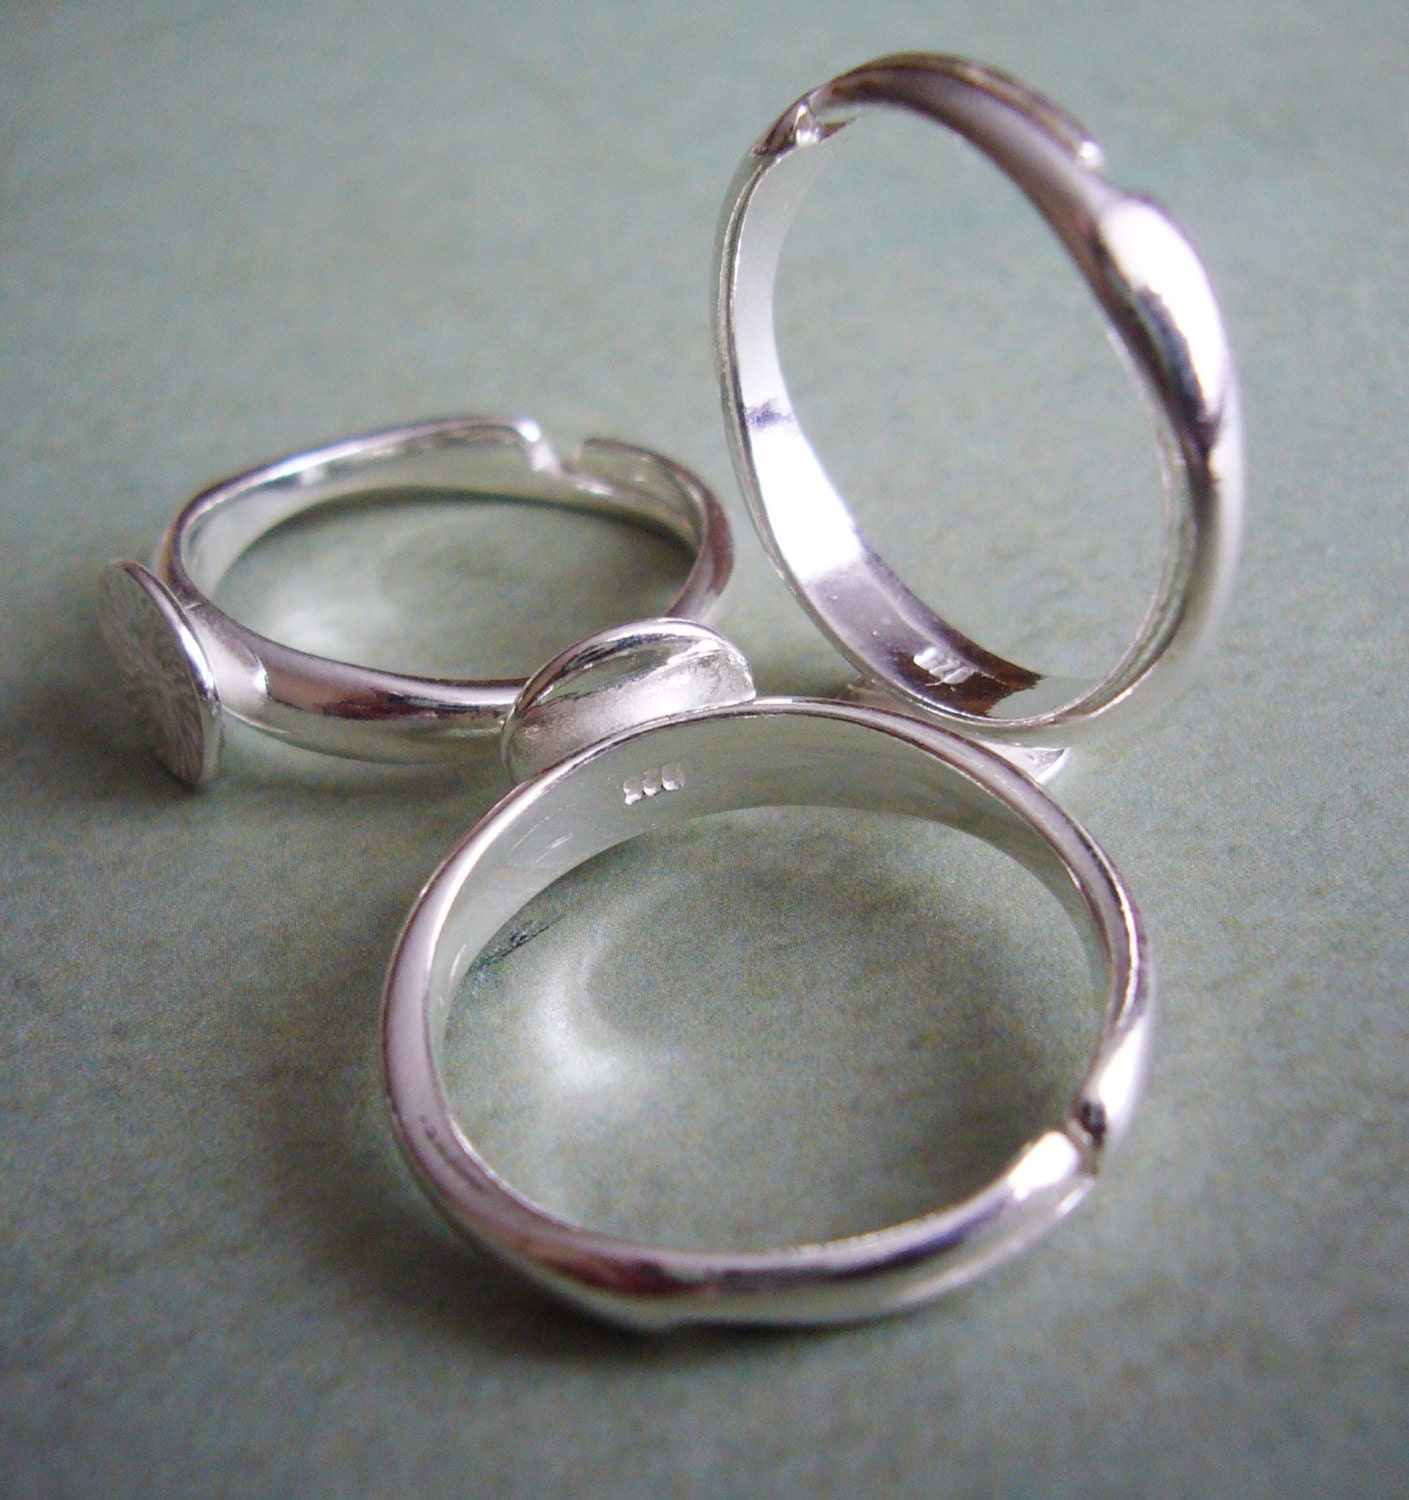 Ring base sterling silver ring blank adjustable for gluing or ...